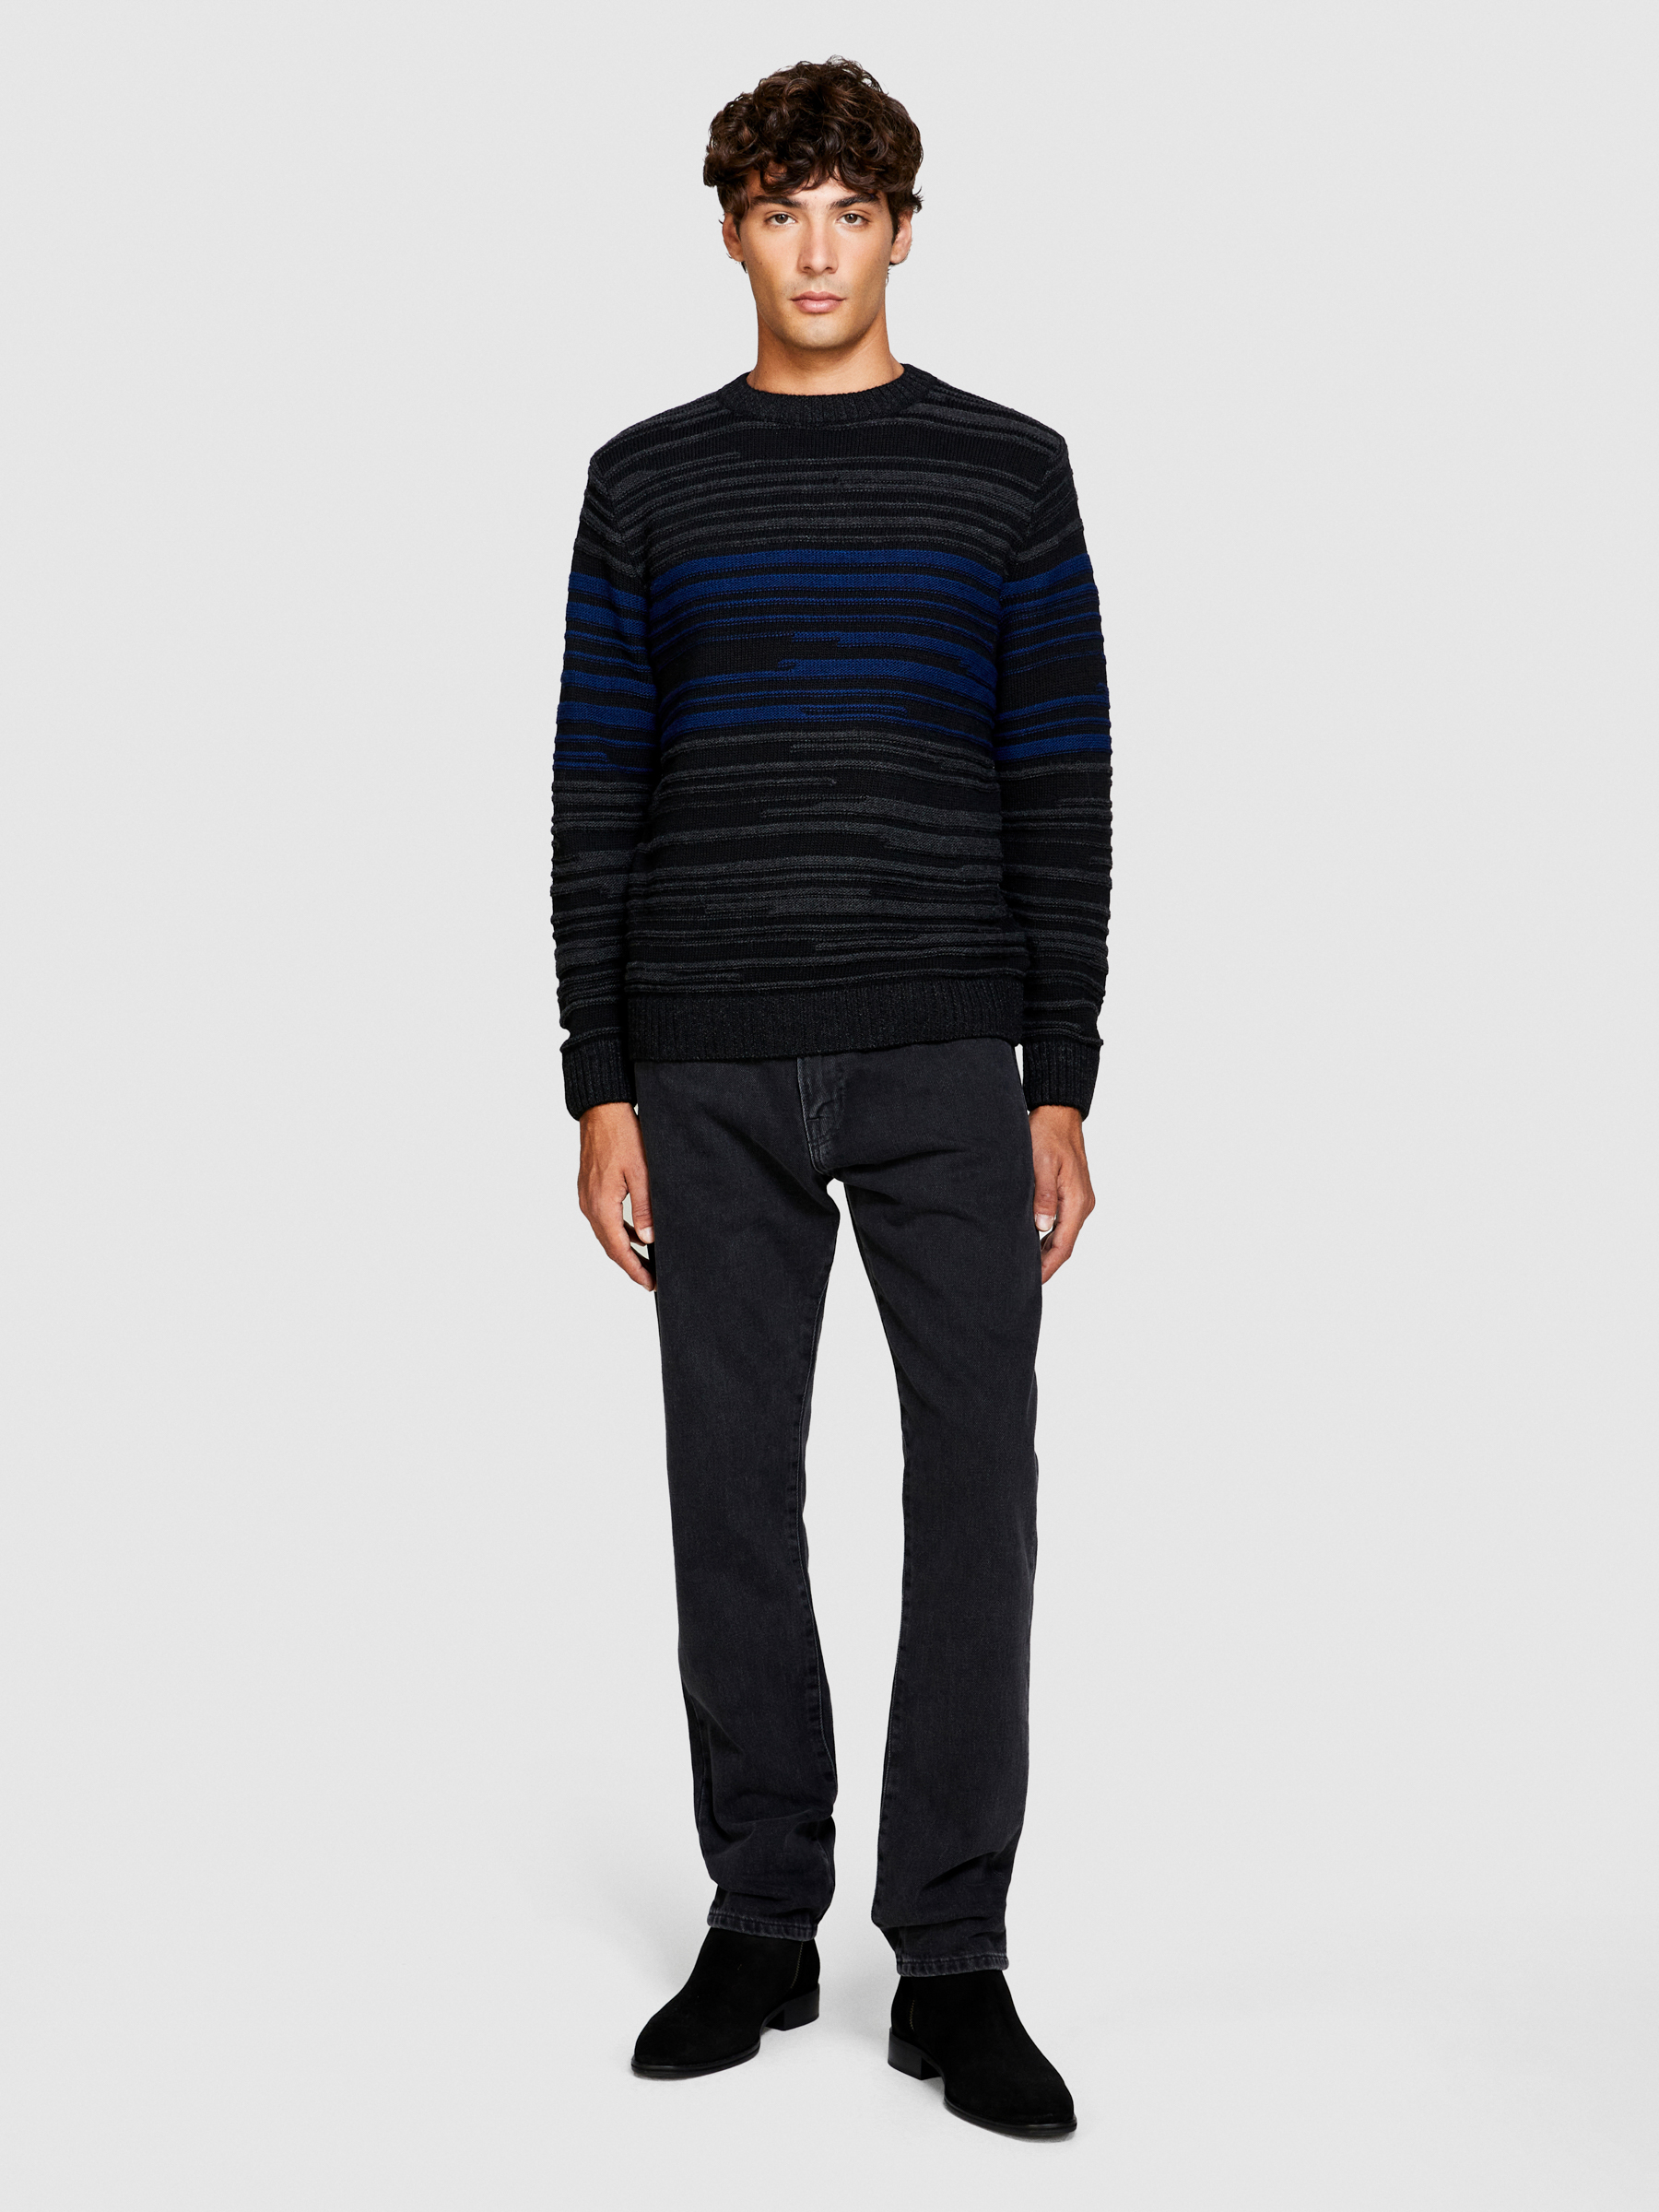 Sisley - Sweater With Stripes, Man, Multi-color, Size: S